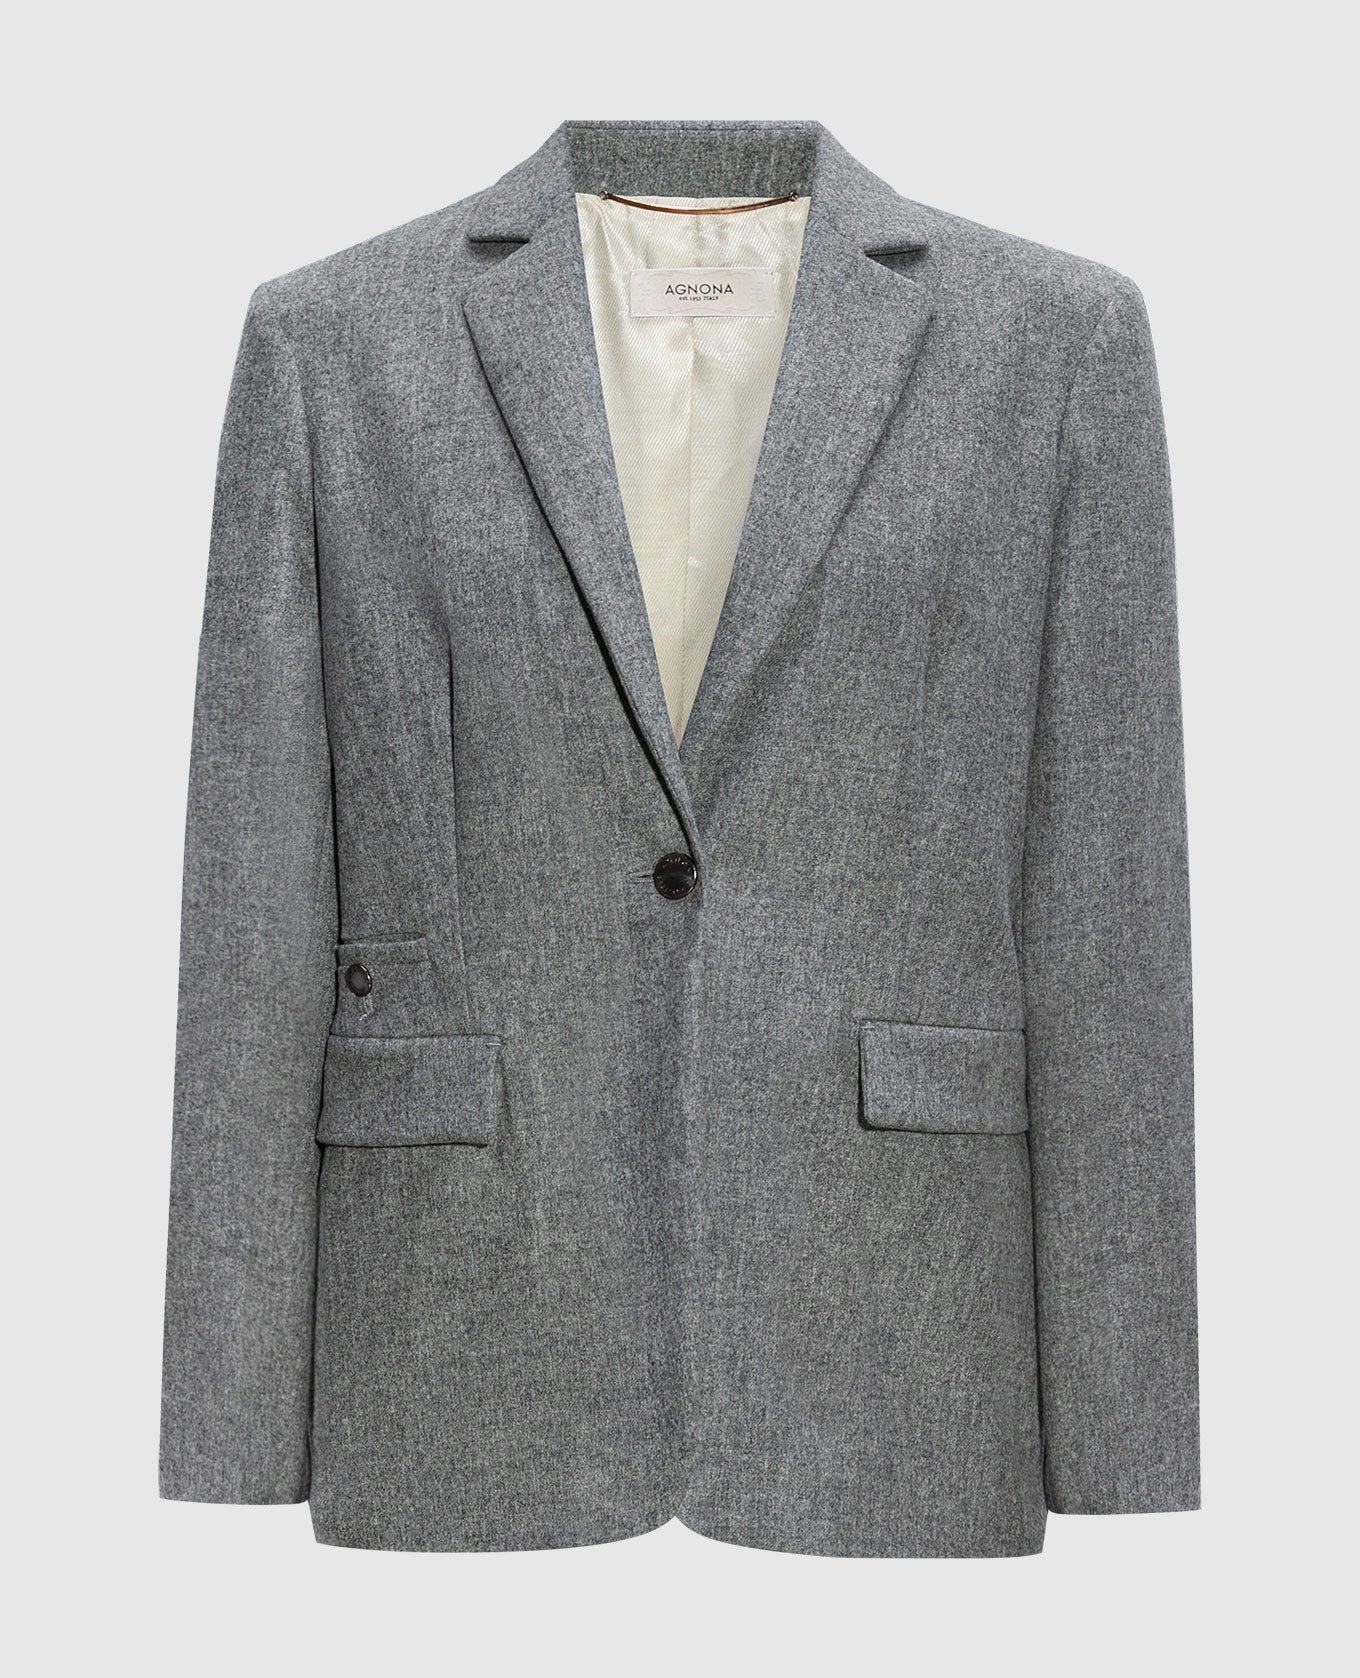 Gray wool and cashmere jacket